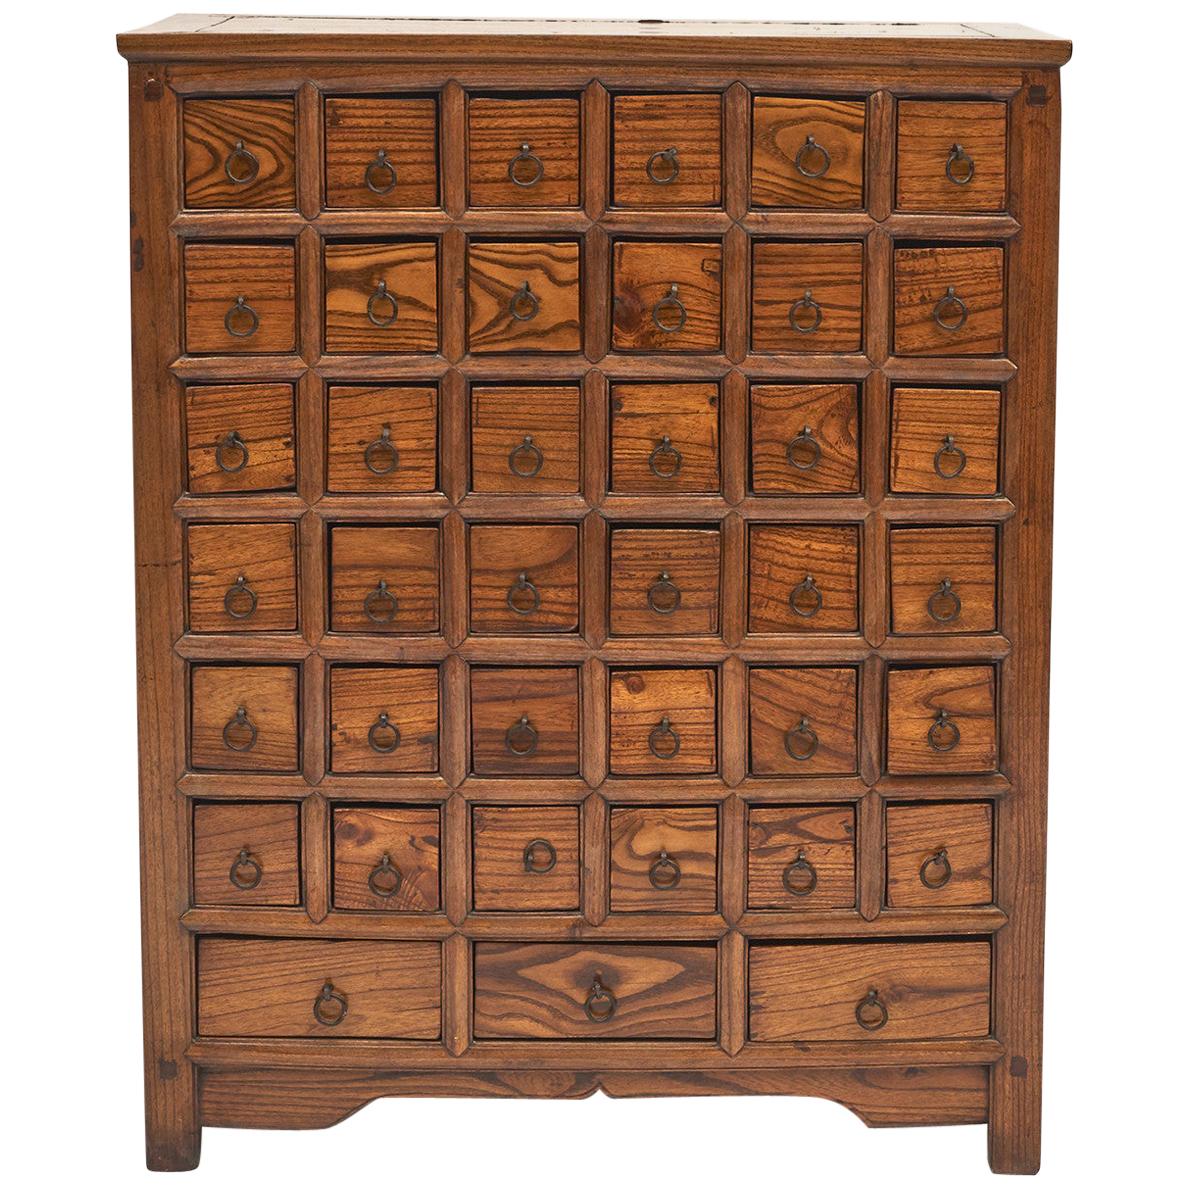 Chinese Apothecary Medicine Chest with 39 Drawers